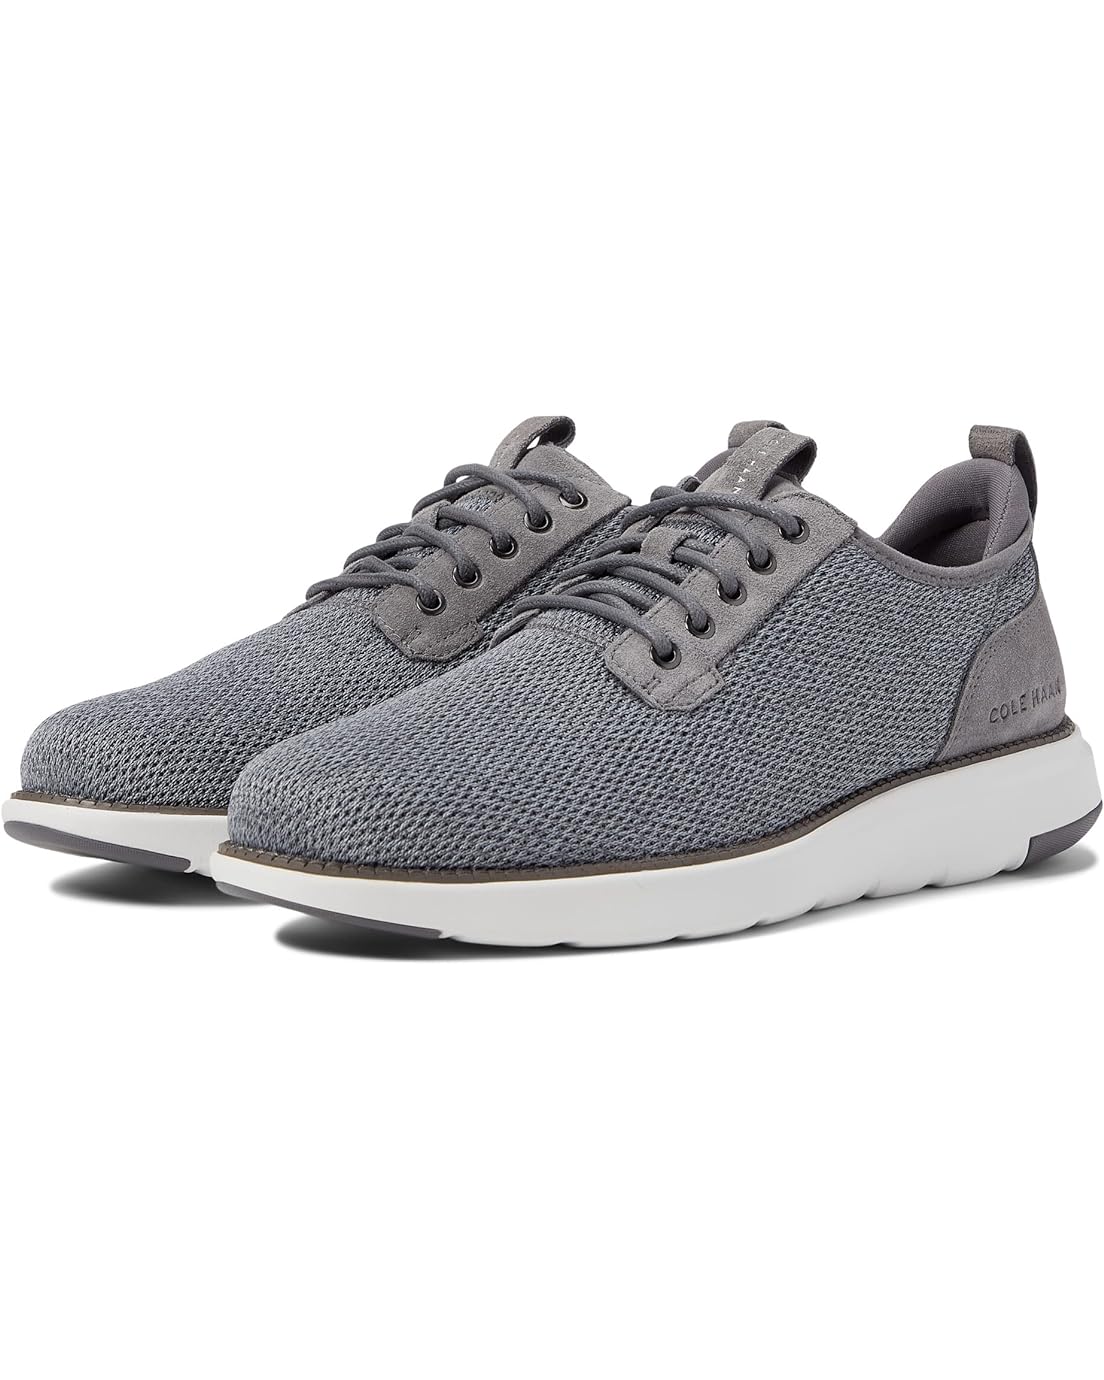 Cole Haan Grand Atlantic Knit Oxford